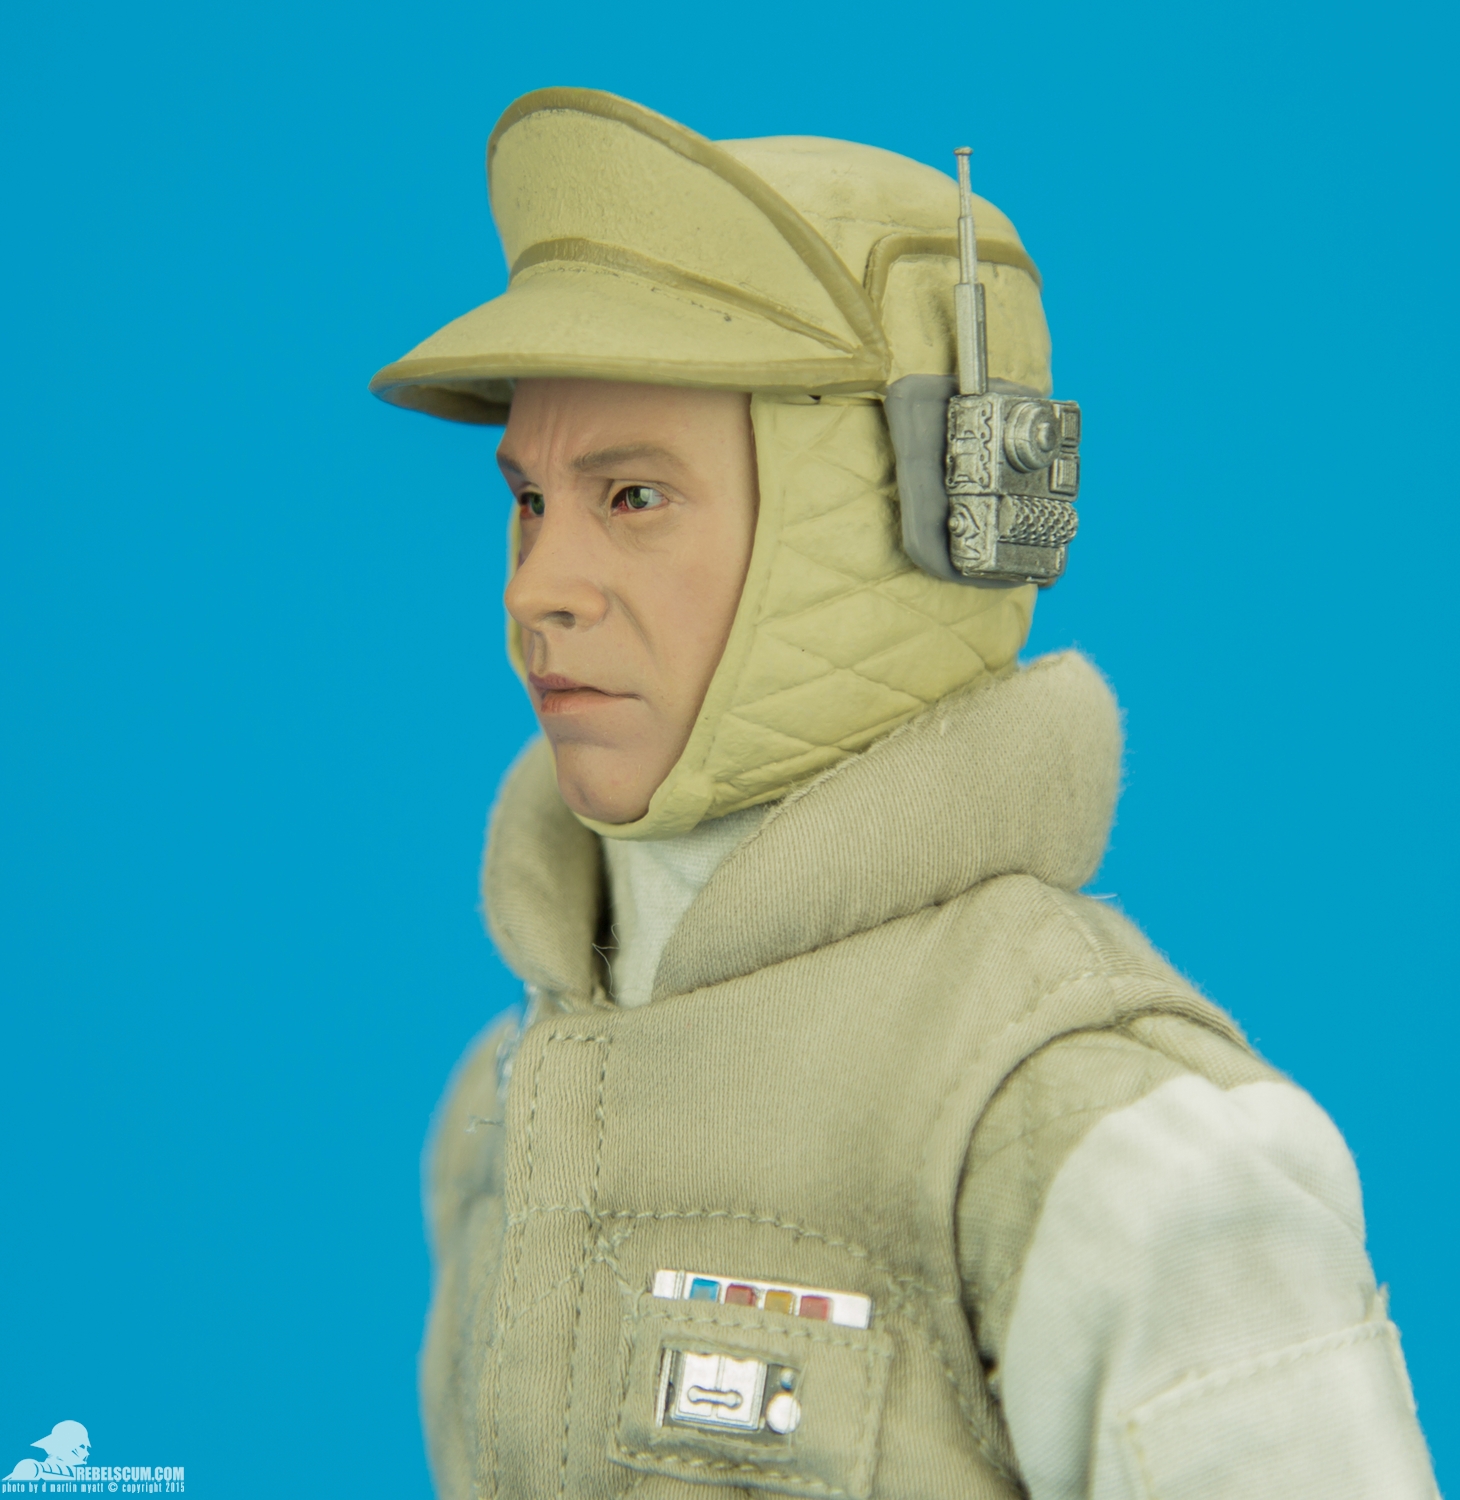 Luke-Skywalker-Hoth-Sixth-Scale-Sideshow-Collectibles-Star-Wars-023.jpg